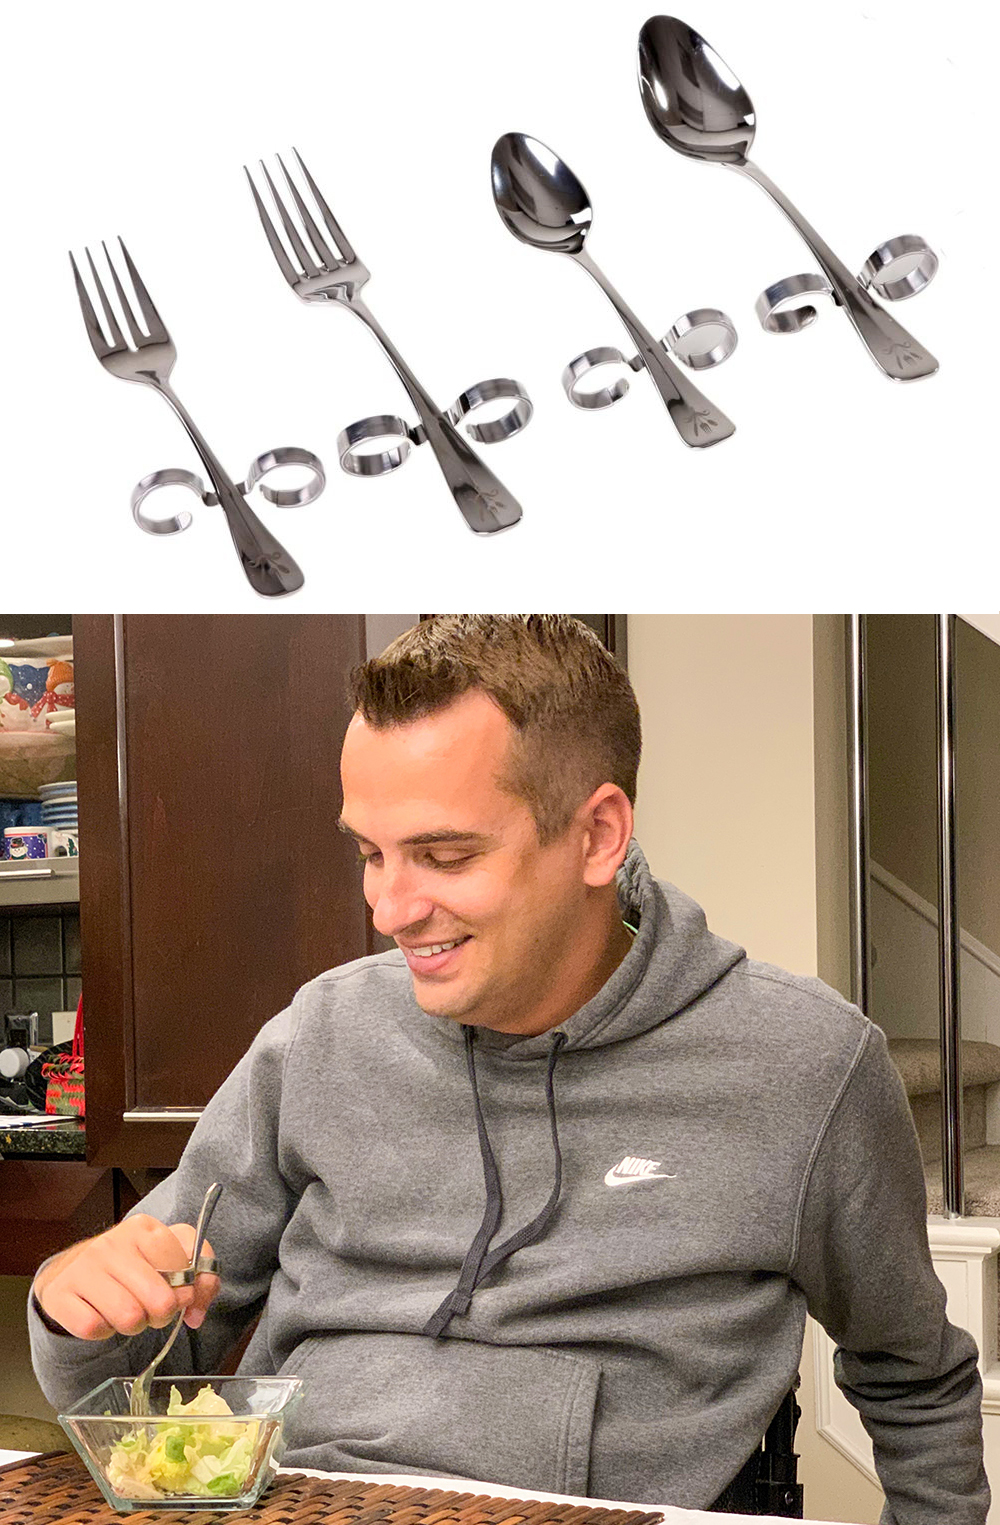 Dining With Dignity flatware mimics the natural grip of a fork, spoon or knife.